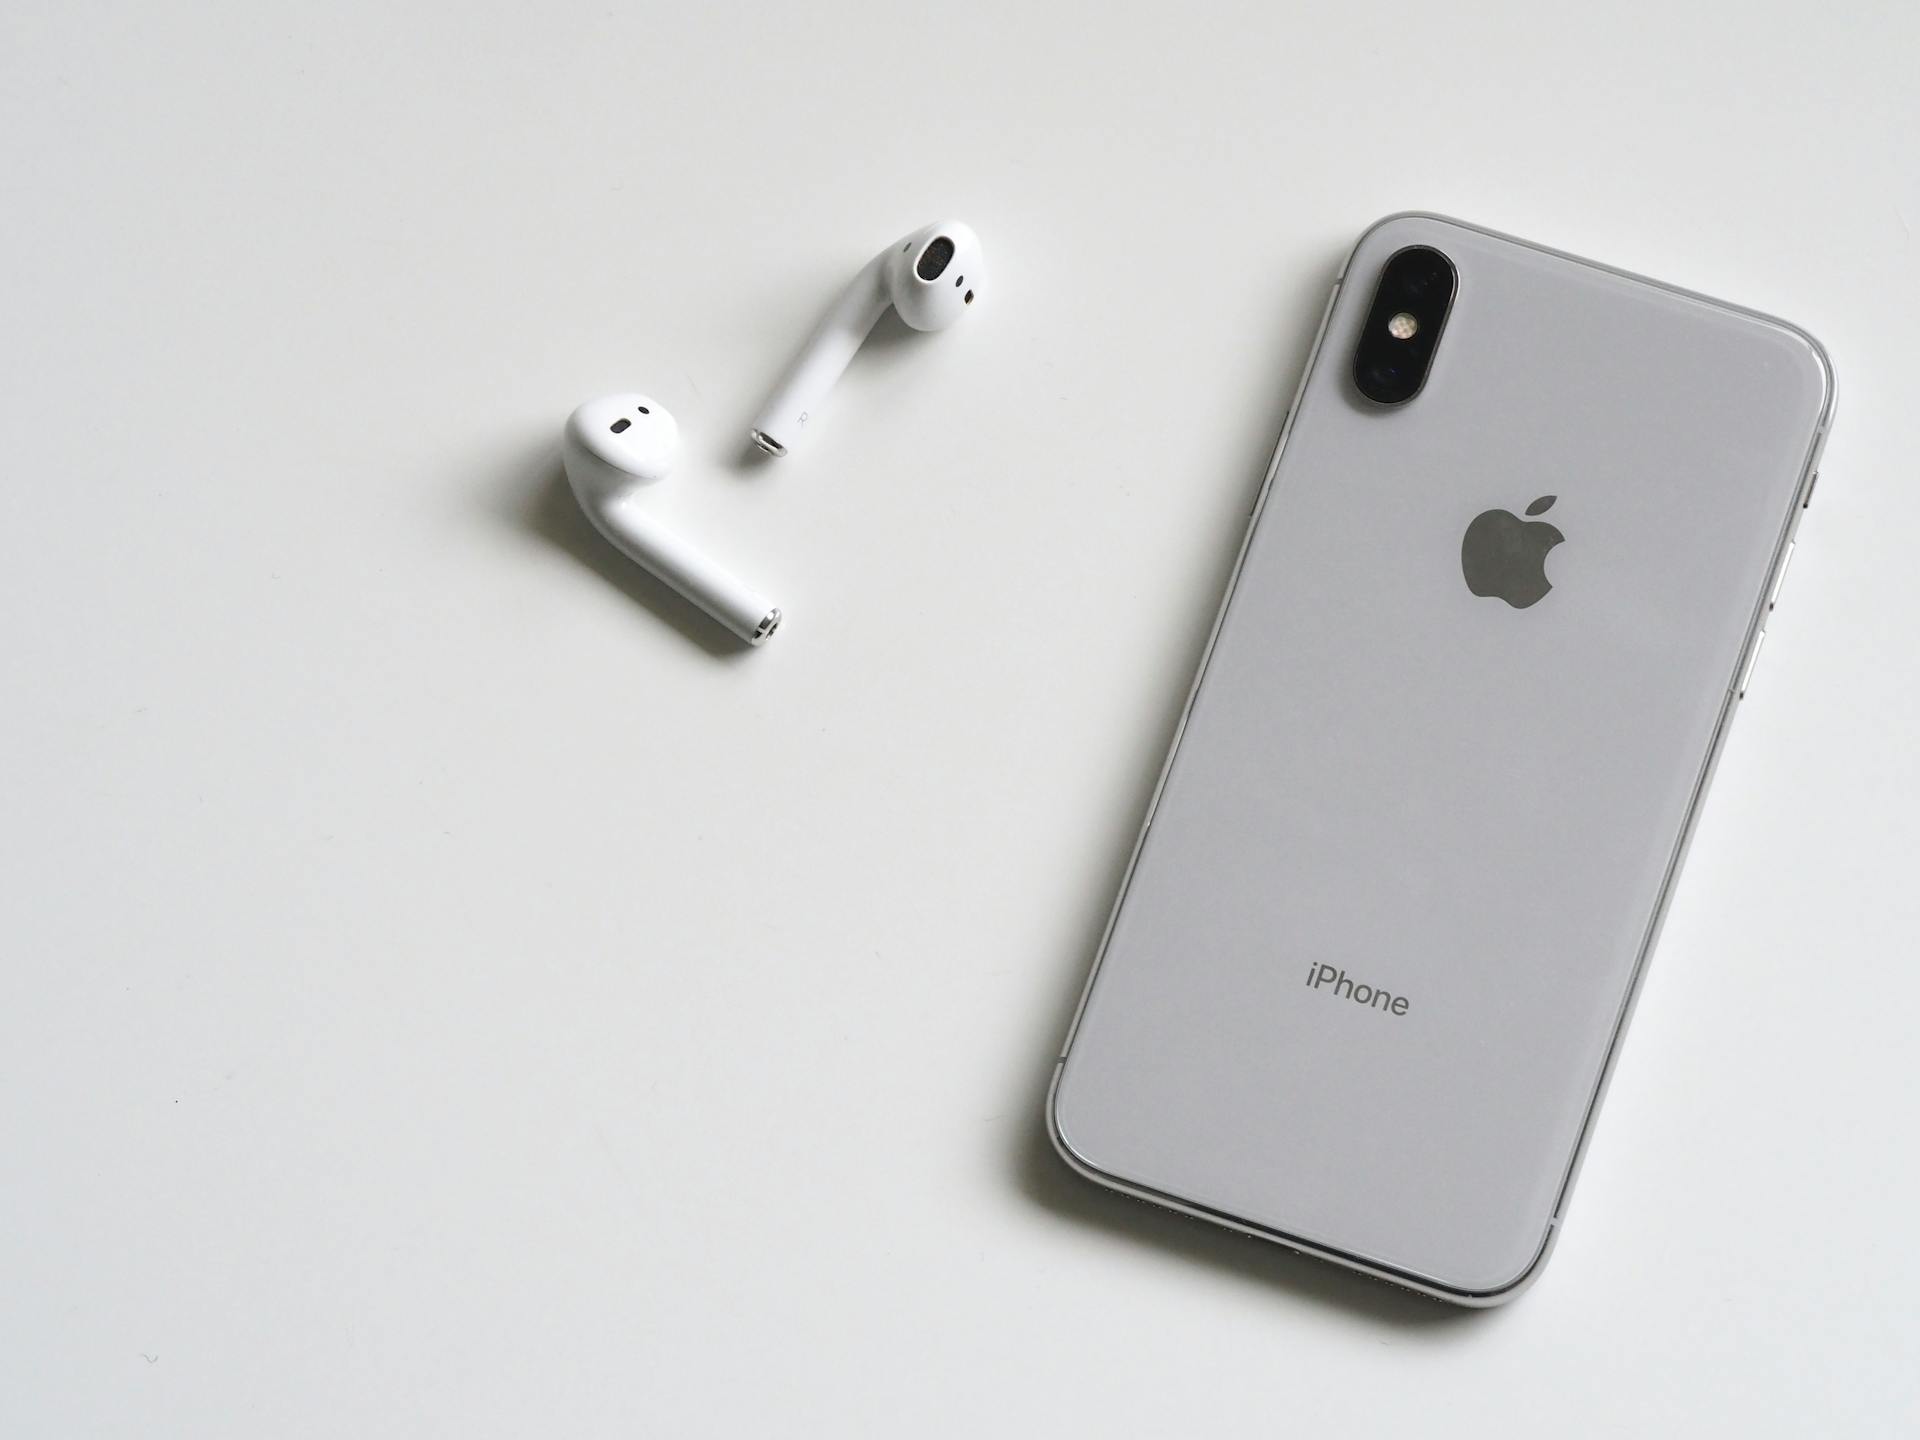 A silver iPhone X with Airpods | Source: Pexels